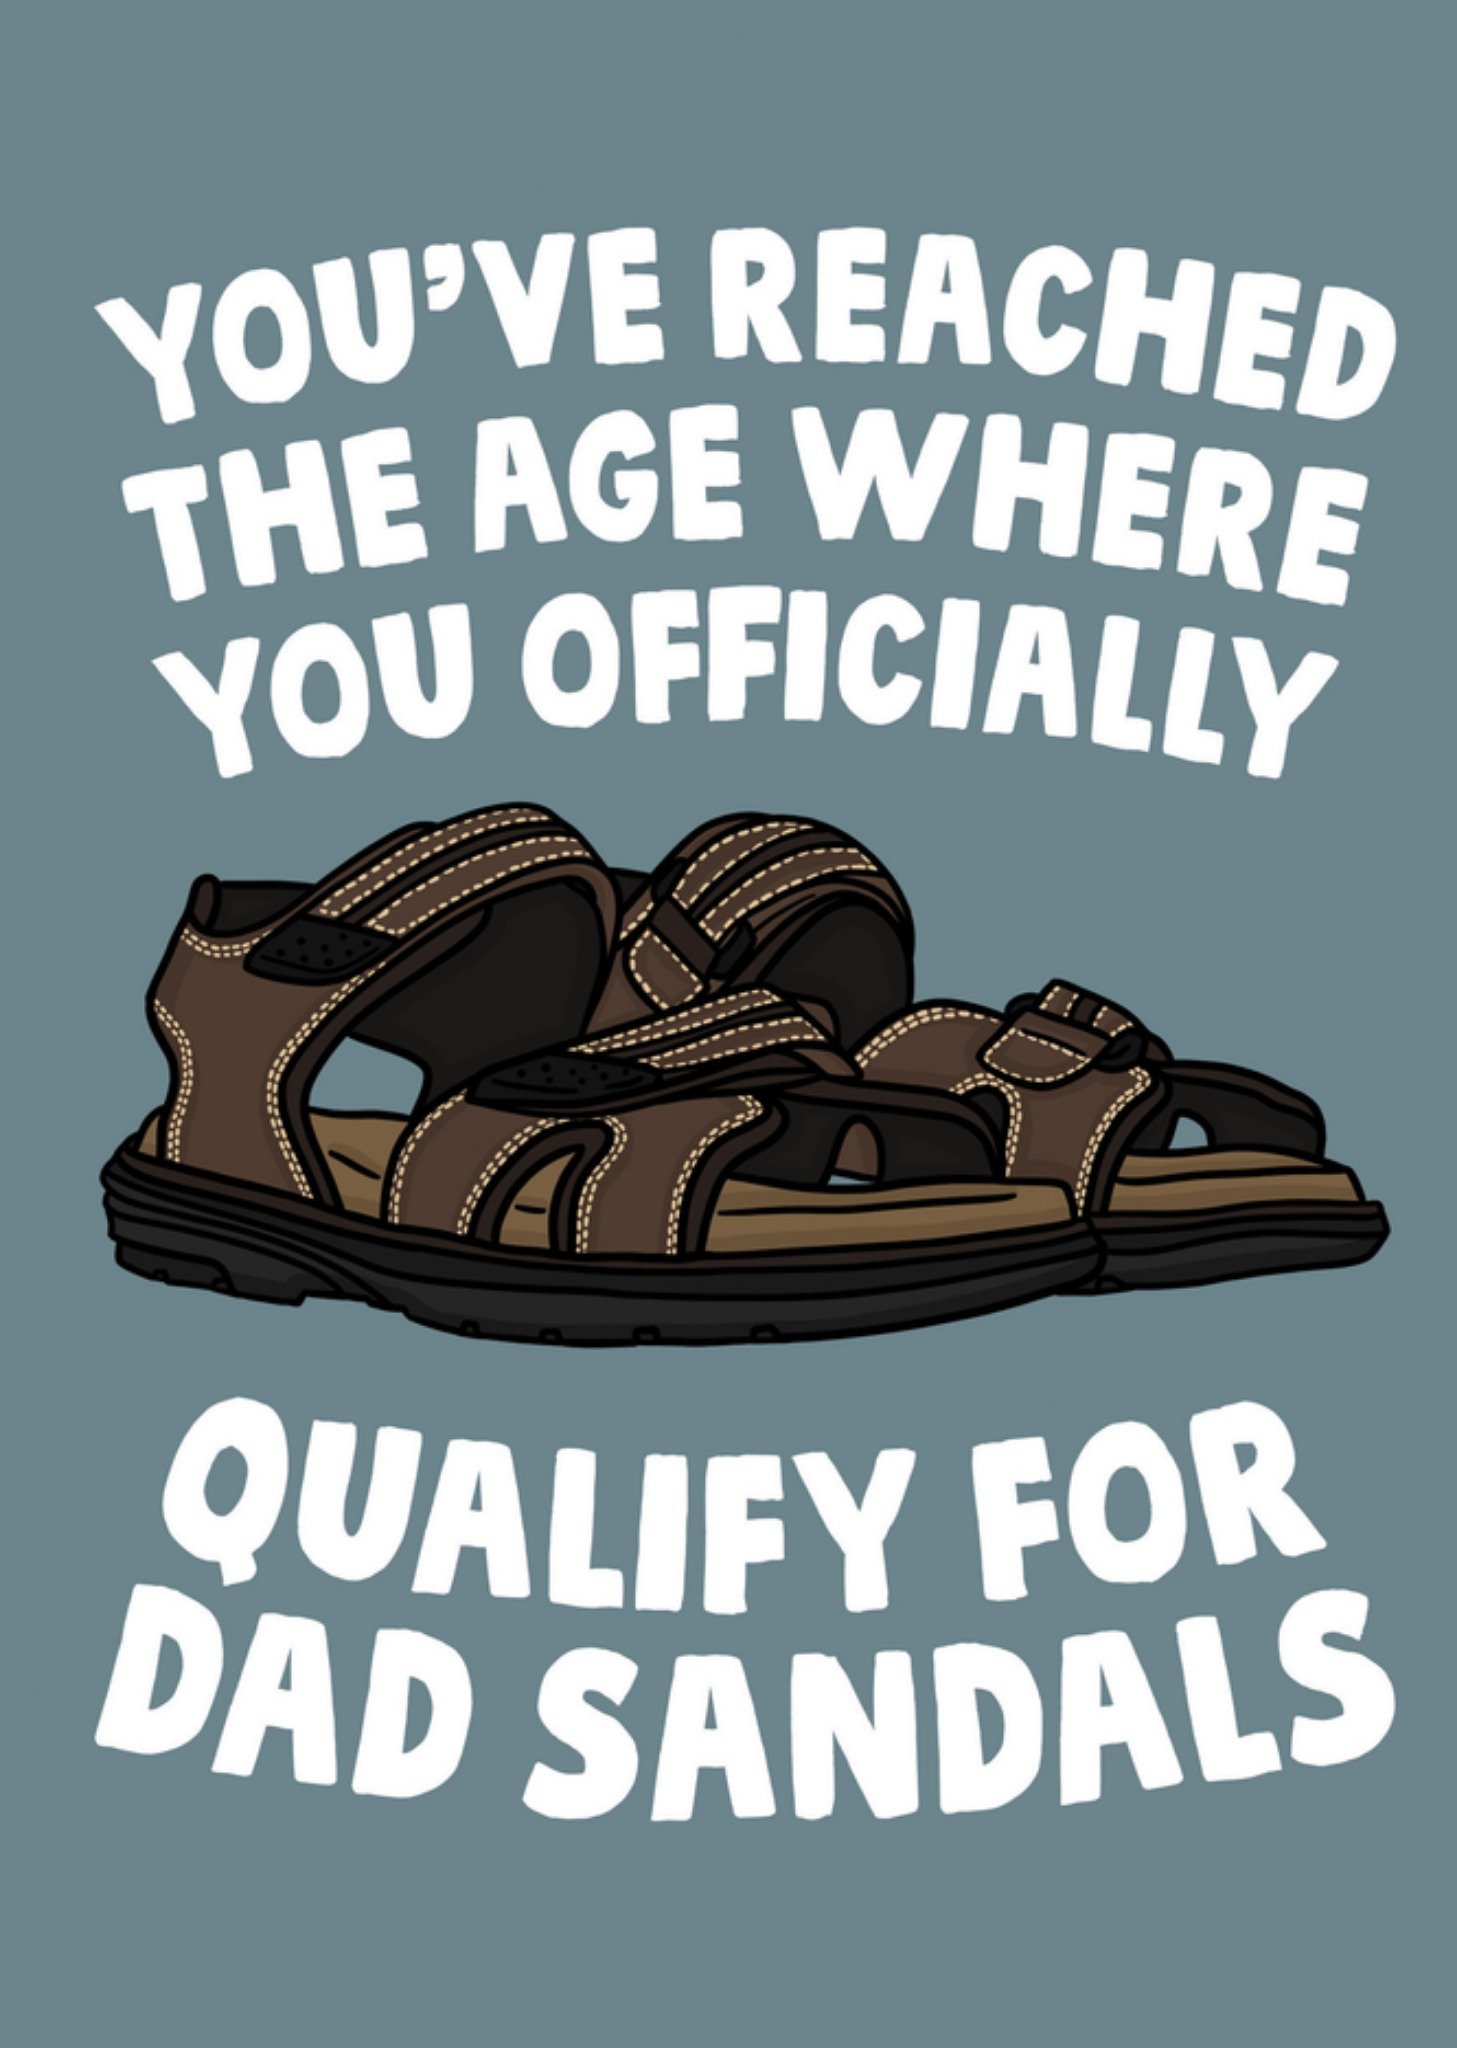 Moonpig Izzy Likes To Doodle You've Reached The Age Where You Icially Qualify For Dad Sandals Birthd